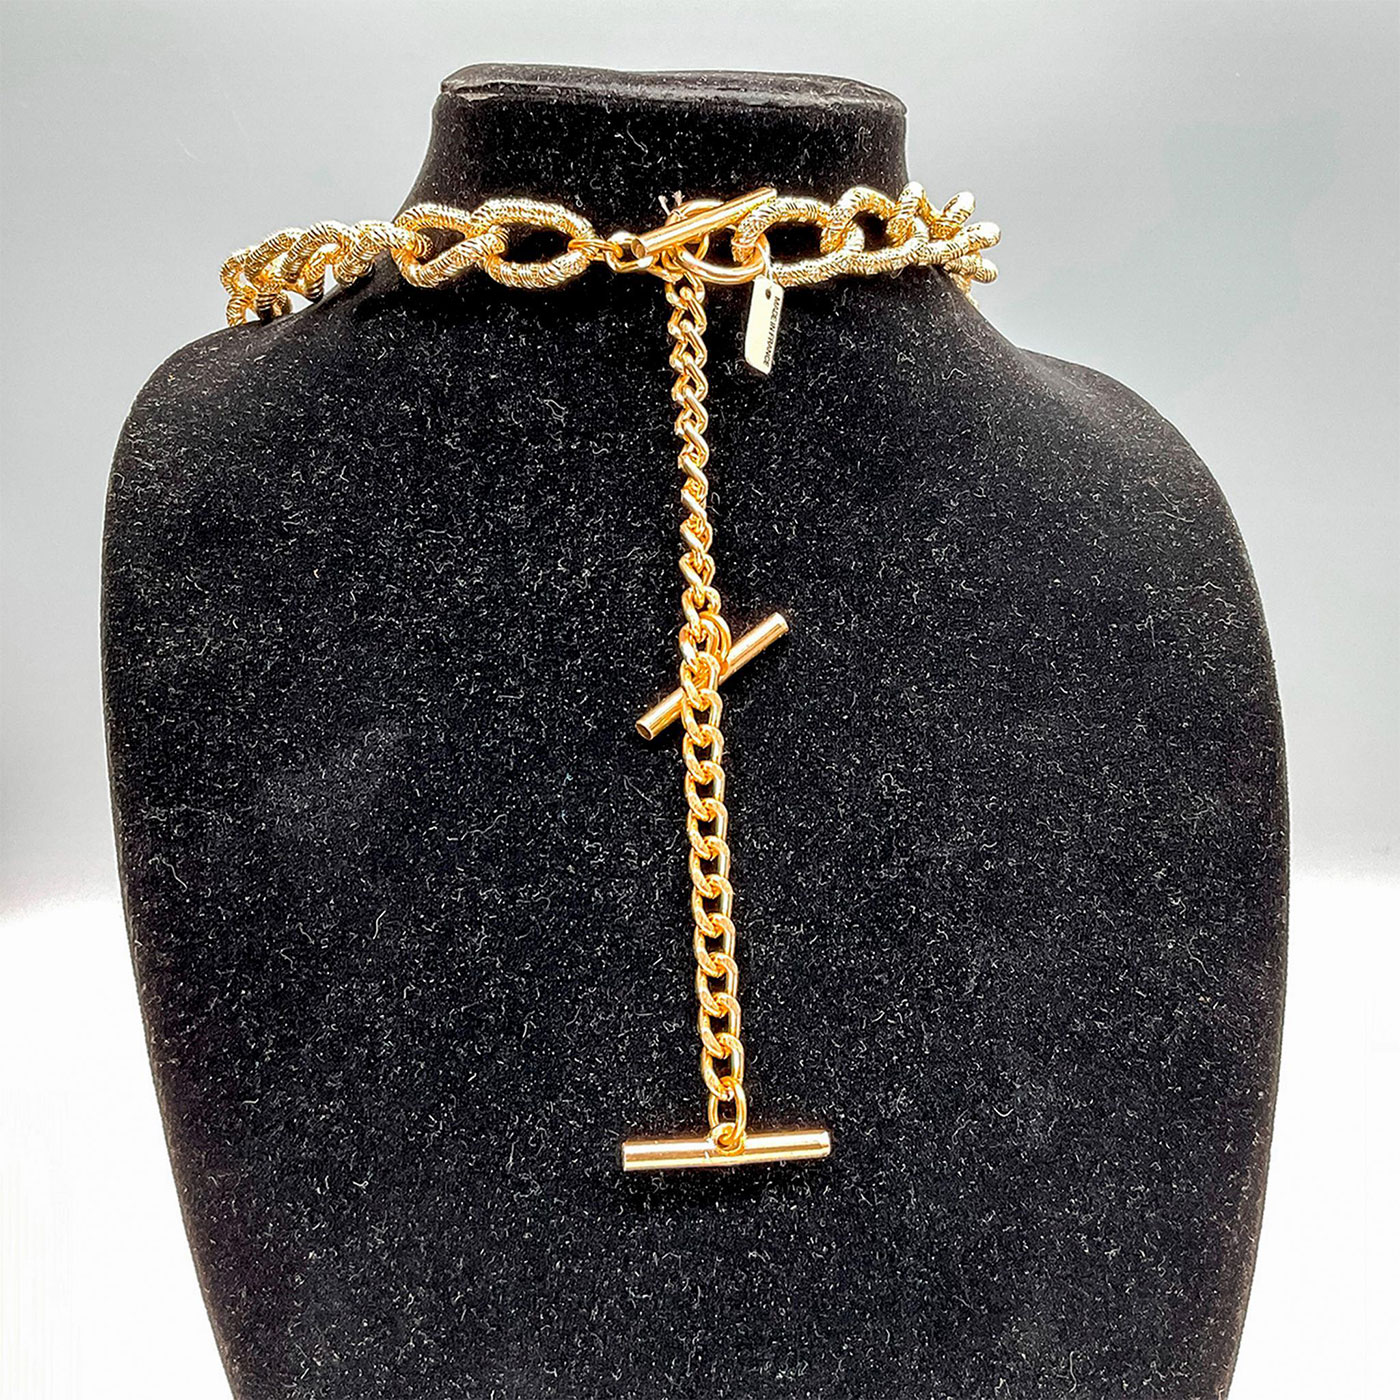 Chanel Inspired Costume Pearl/Gold Chain Necklace w/Charms - Image 3 of 3